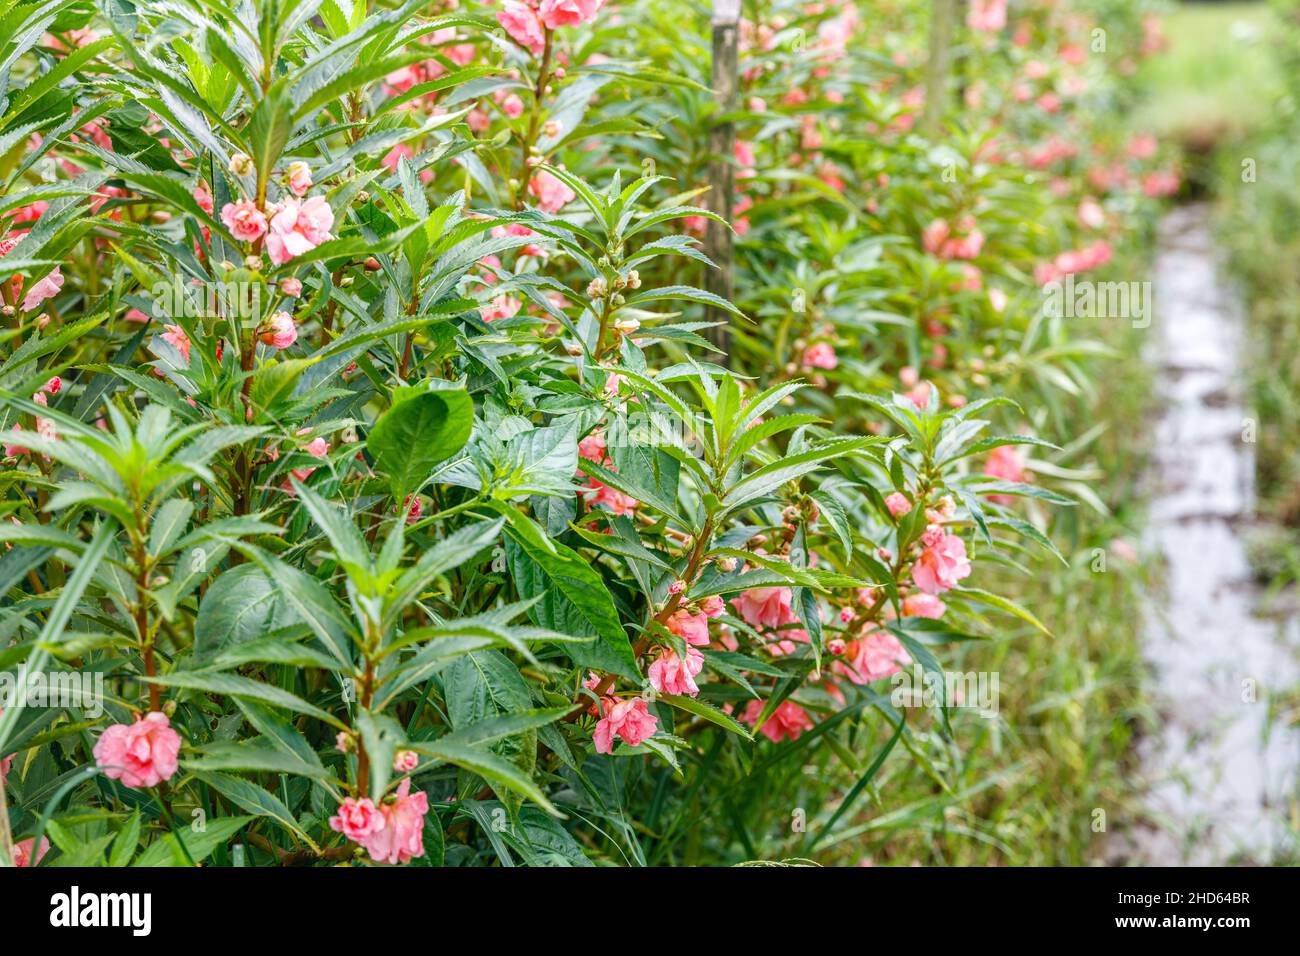 Blooming pink garden balsam, rose balsam or touch-me-not (Impatiens balsamina). Bali, Indonesia. Stock Photo